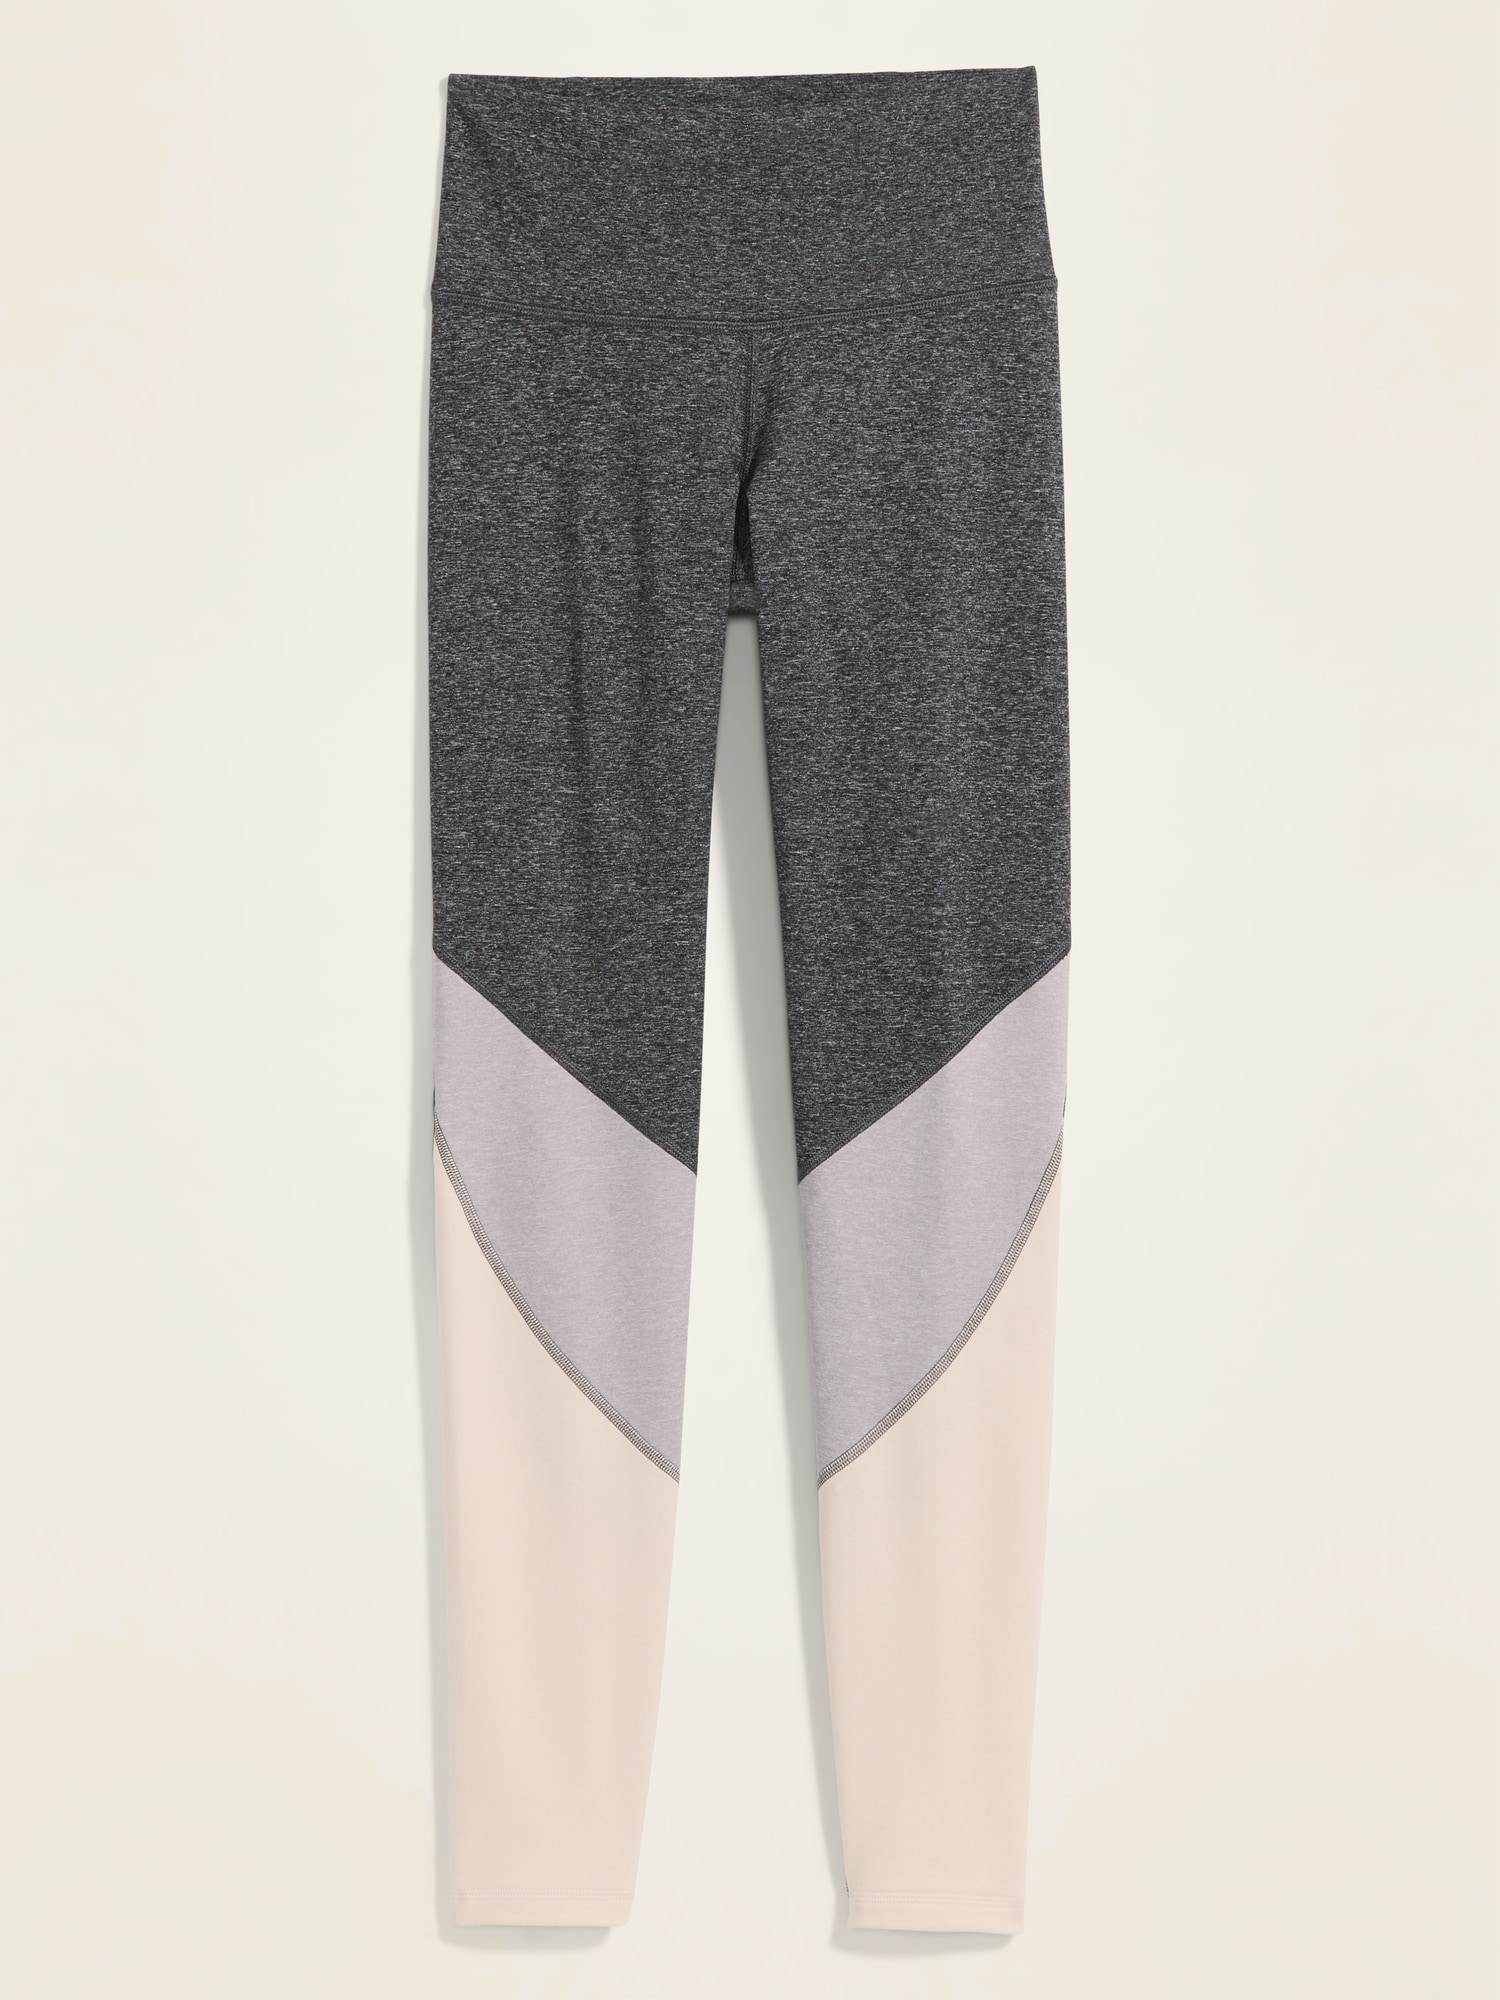 Old Navy, Pants & Jumpsuits, Old Navy Elevate Angle Color Block Legging